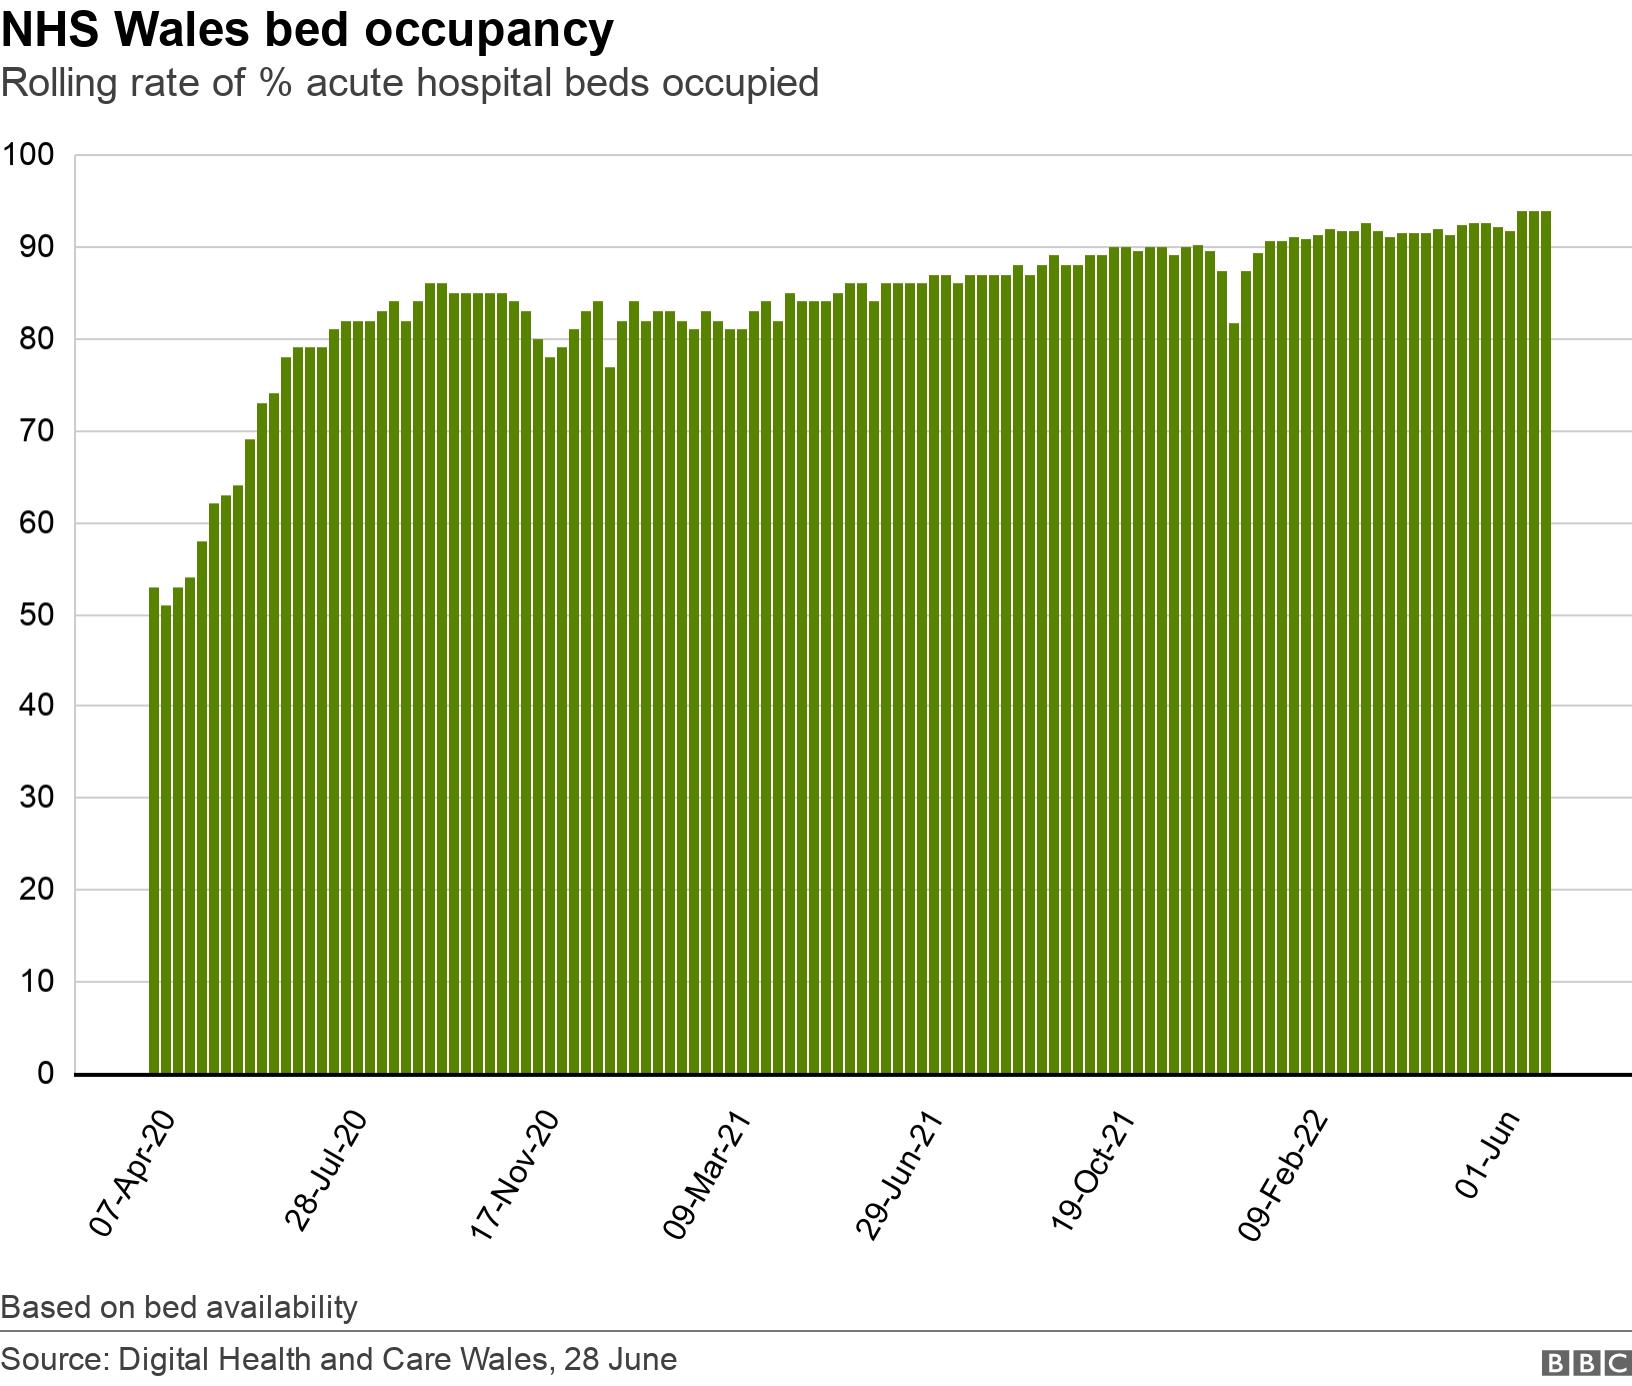 NHS Wales bed occupancy. Rolling rate of % acute hospital beds occupied.  Based on bed availability.